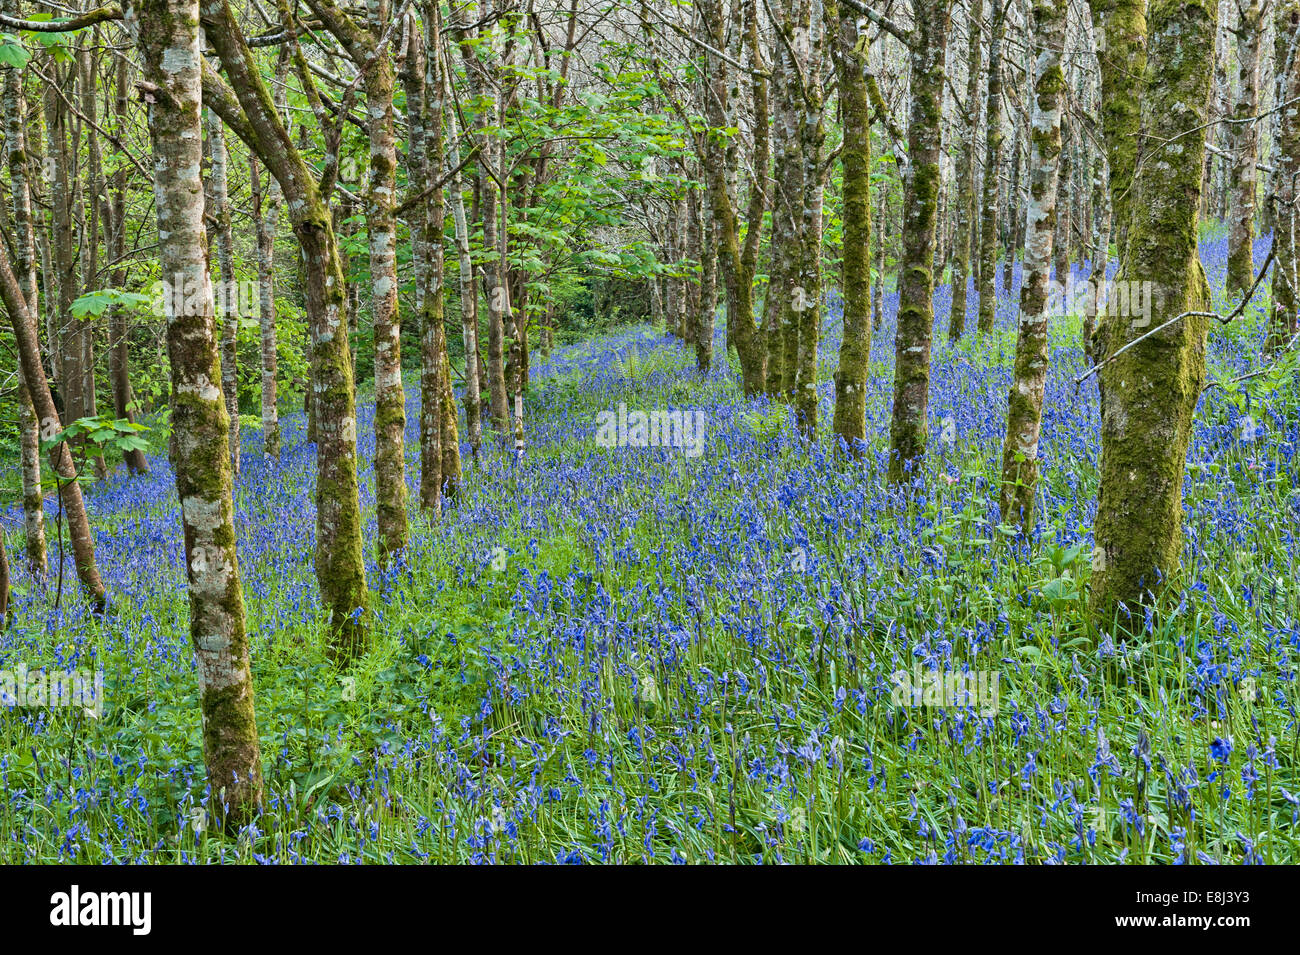 Silver birch trees stand among bluebells flowering in the spring, in the grounds of the Trevarno Estate, Helston, Cornwall (now closed to the public) Stock Photo